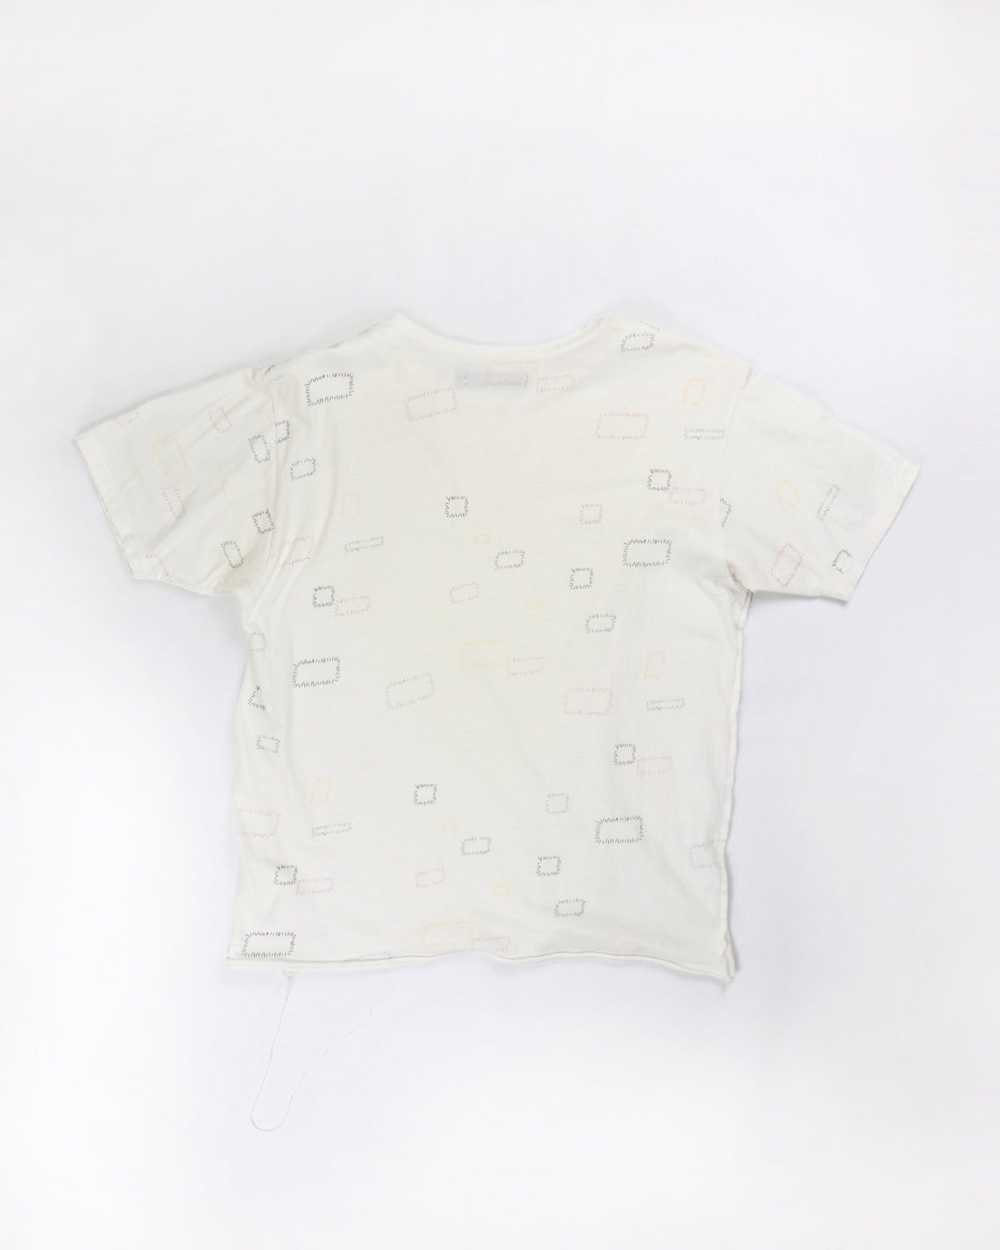 Undercover Undercover SS03 “Scab” Tee - image 2